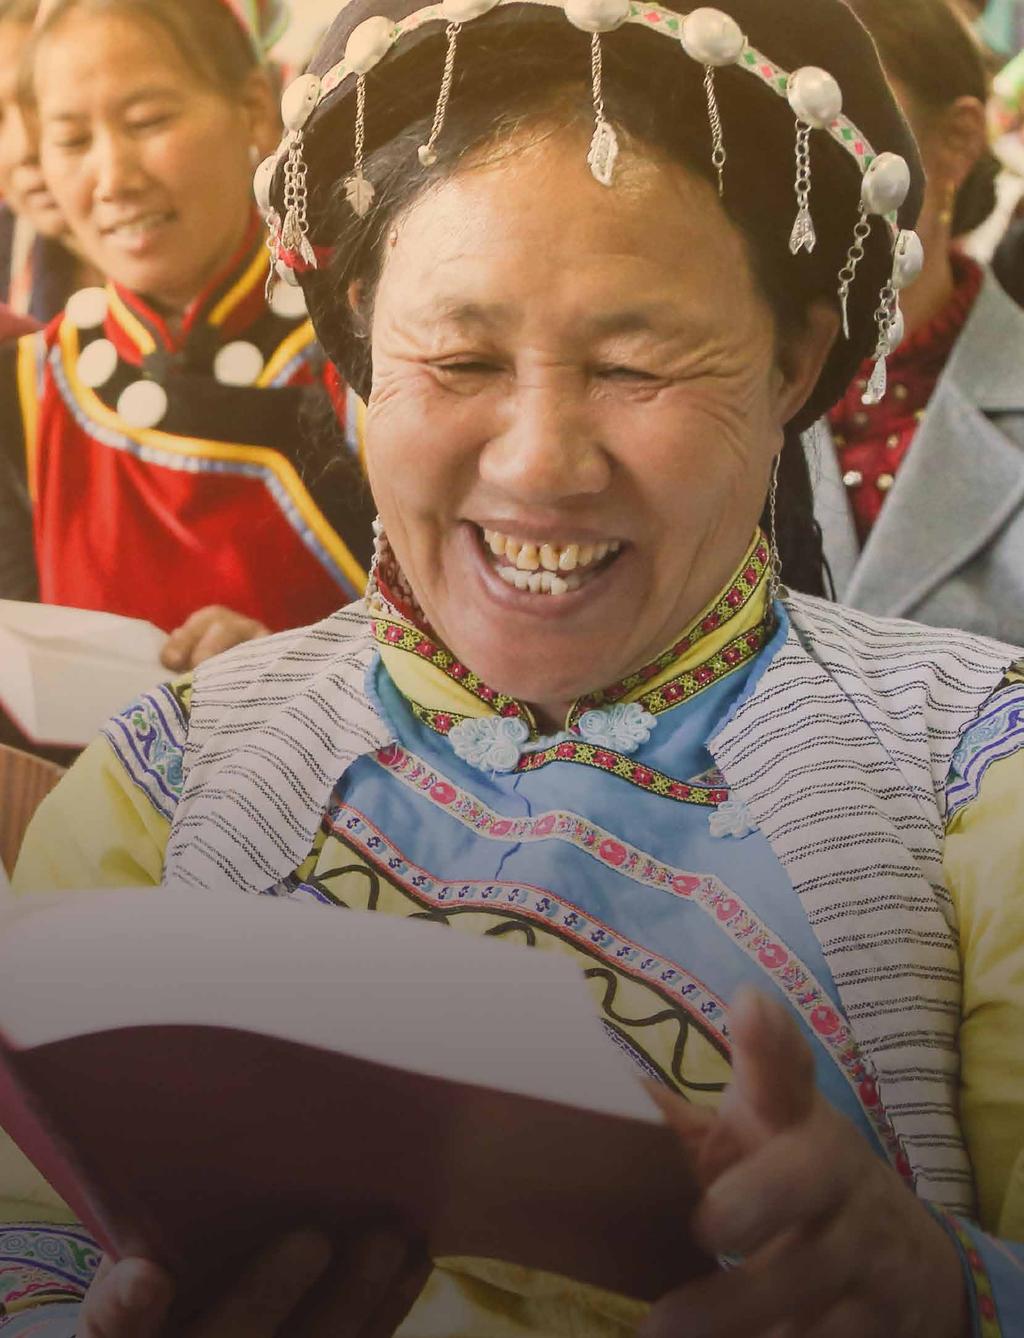 day 1 Bibleless People day 2 Bible Translators People from 1,575 language groups have no access to Scripture. Ask God to give hope to those still waiting to read Scripture for the first time.